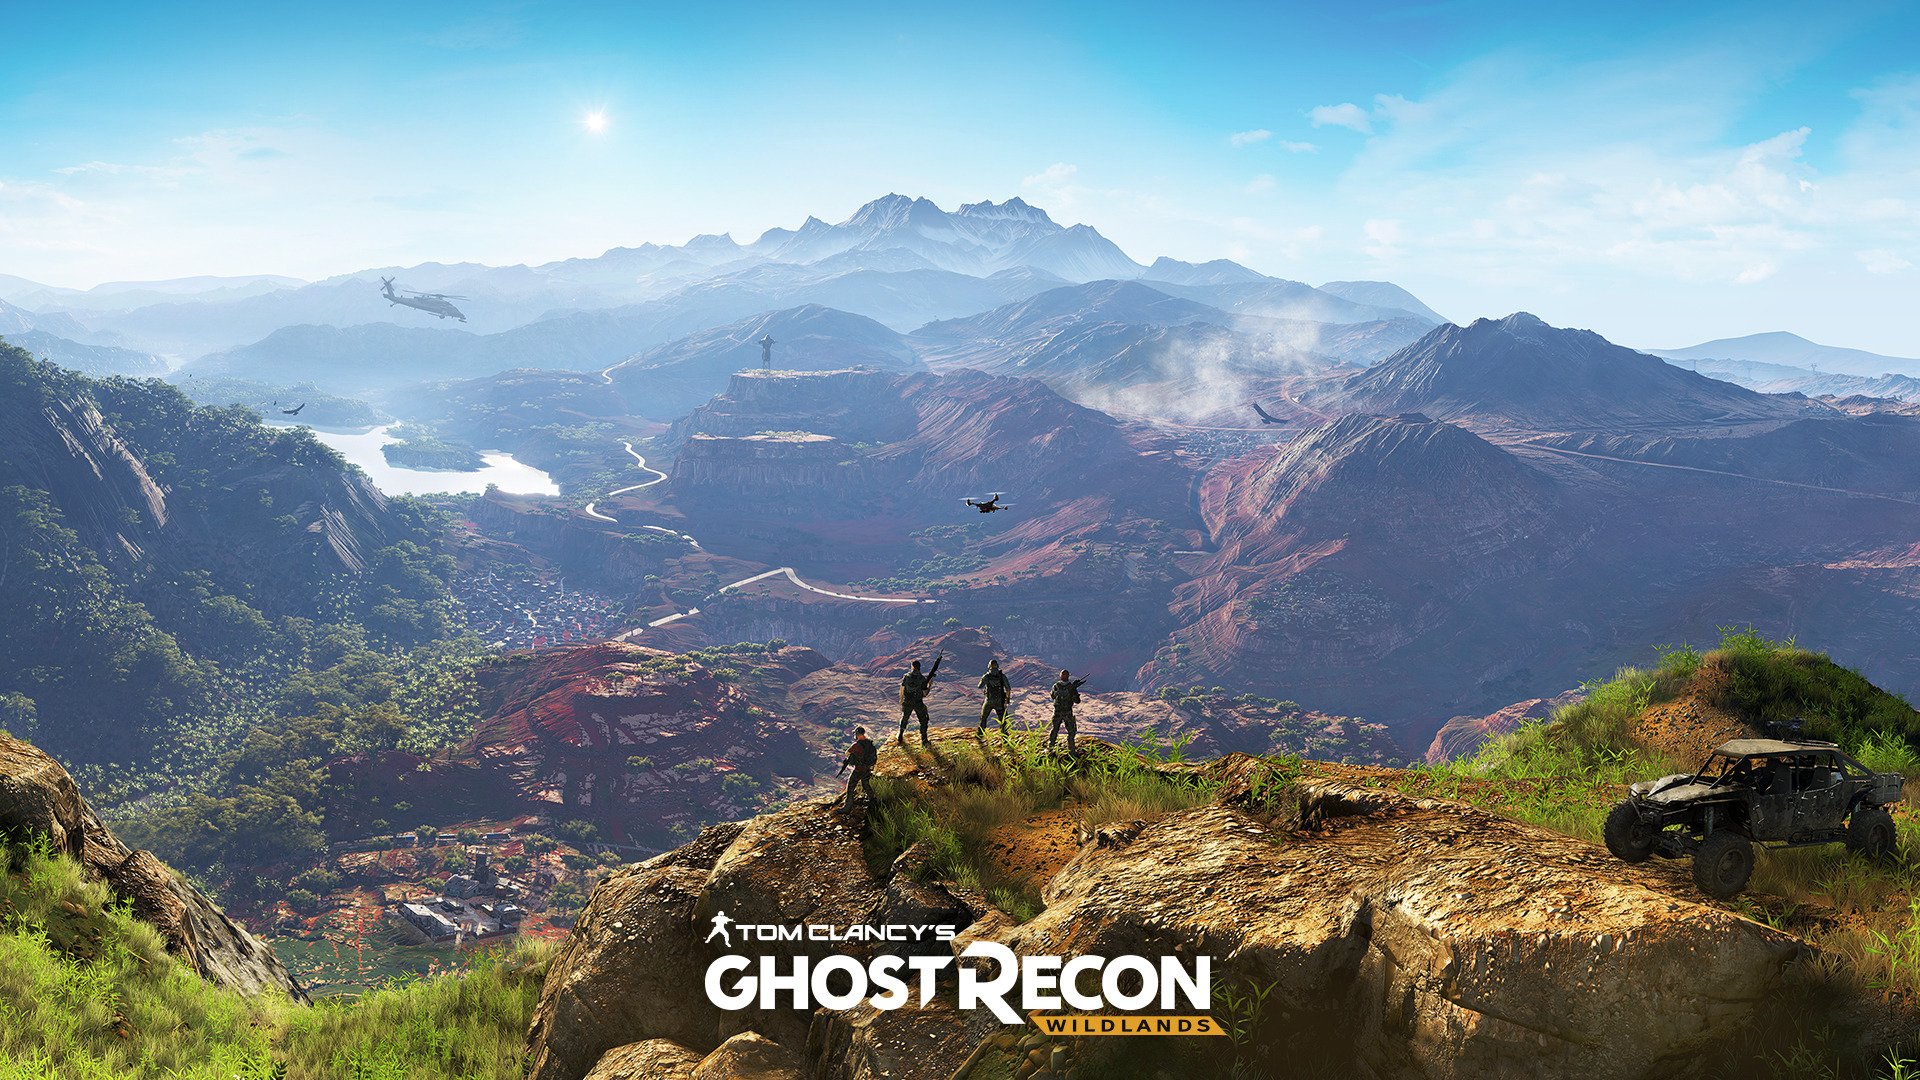 tom clancy's ghost recon breakpoint